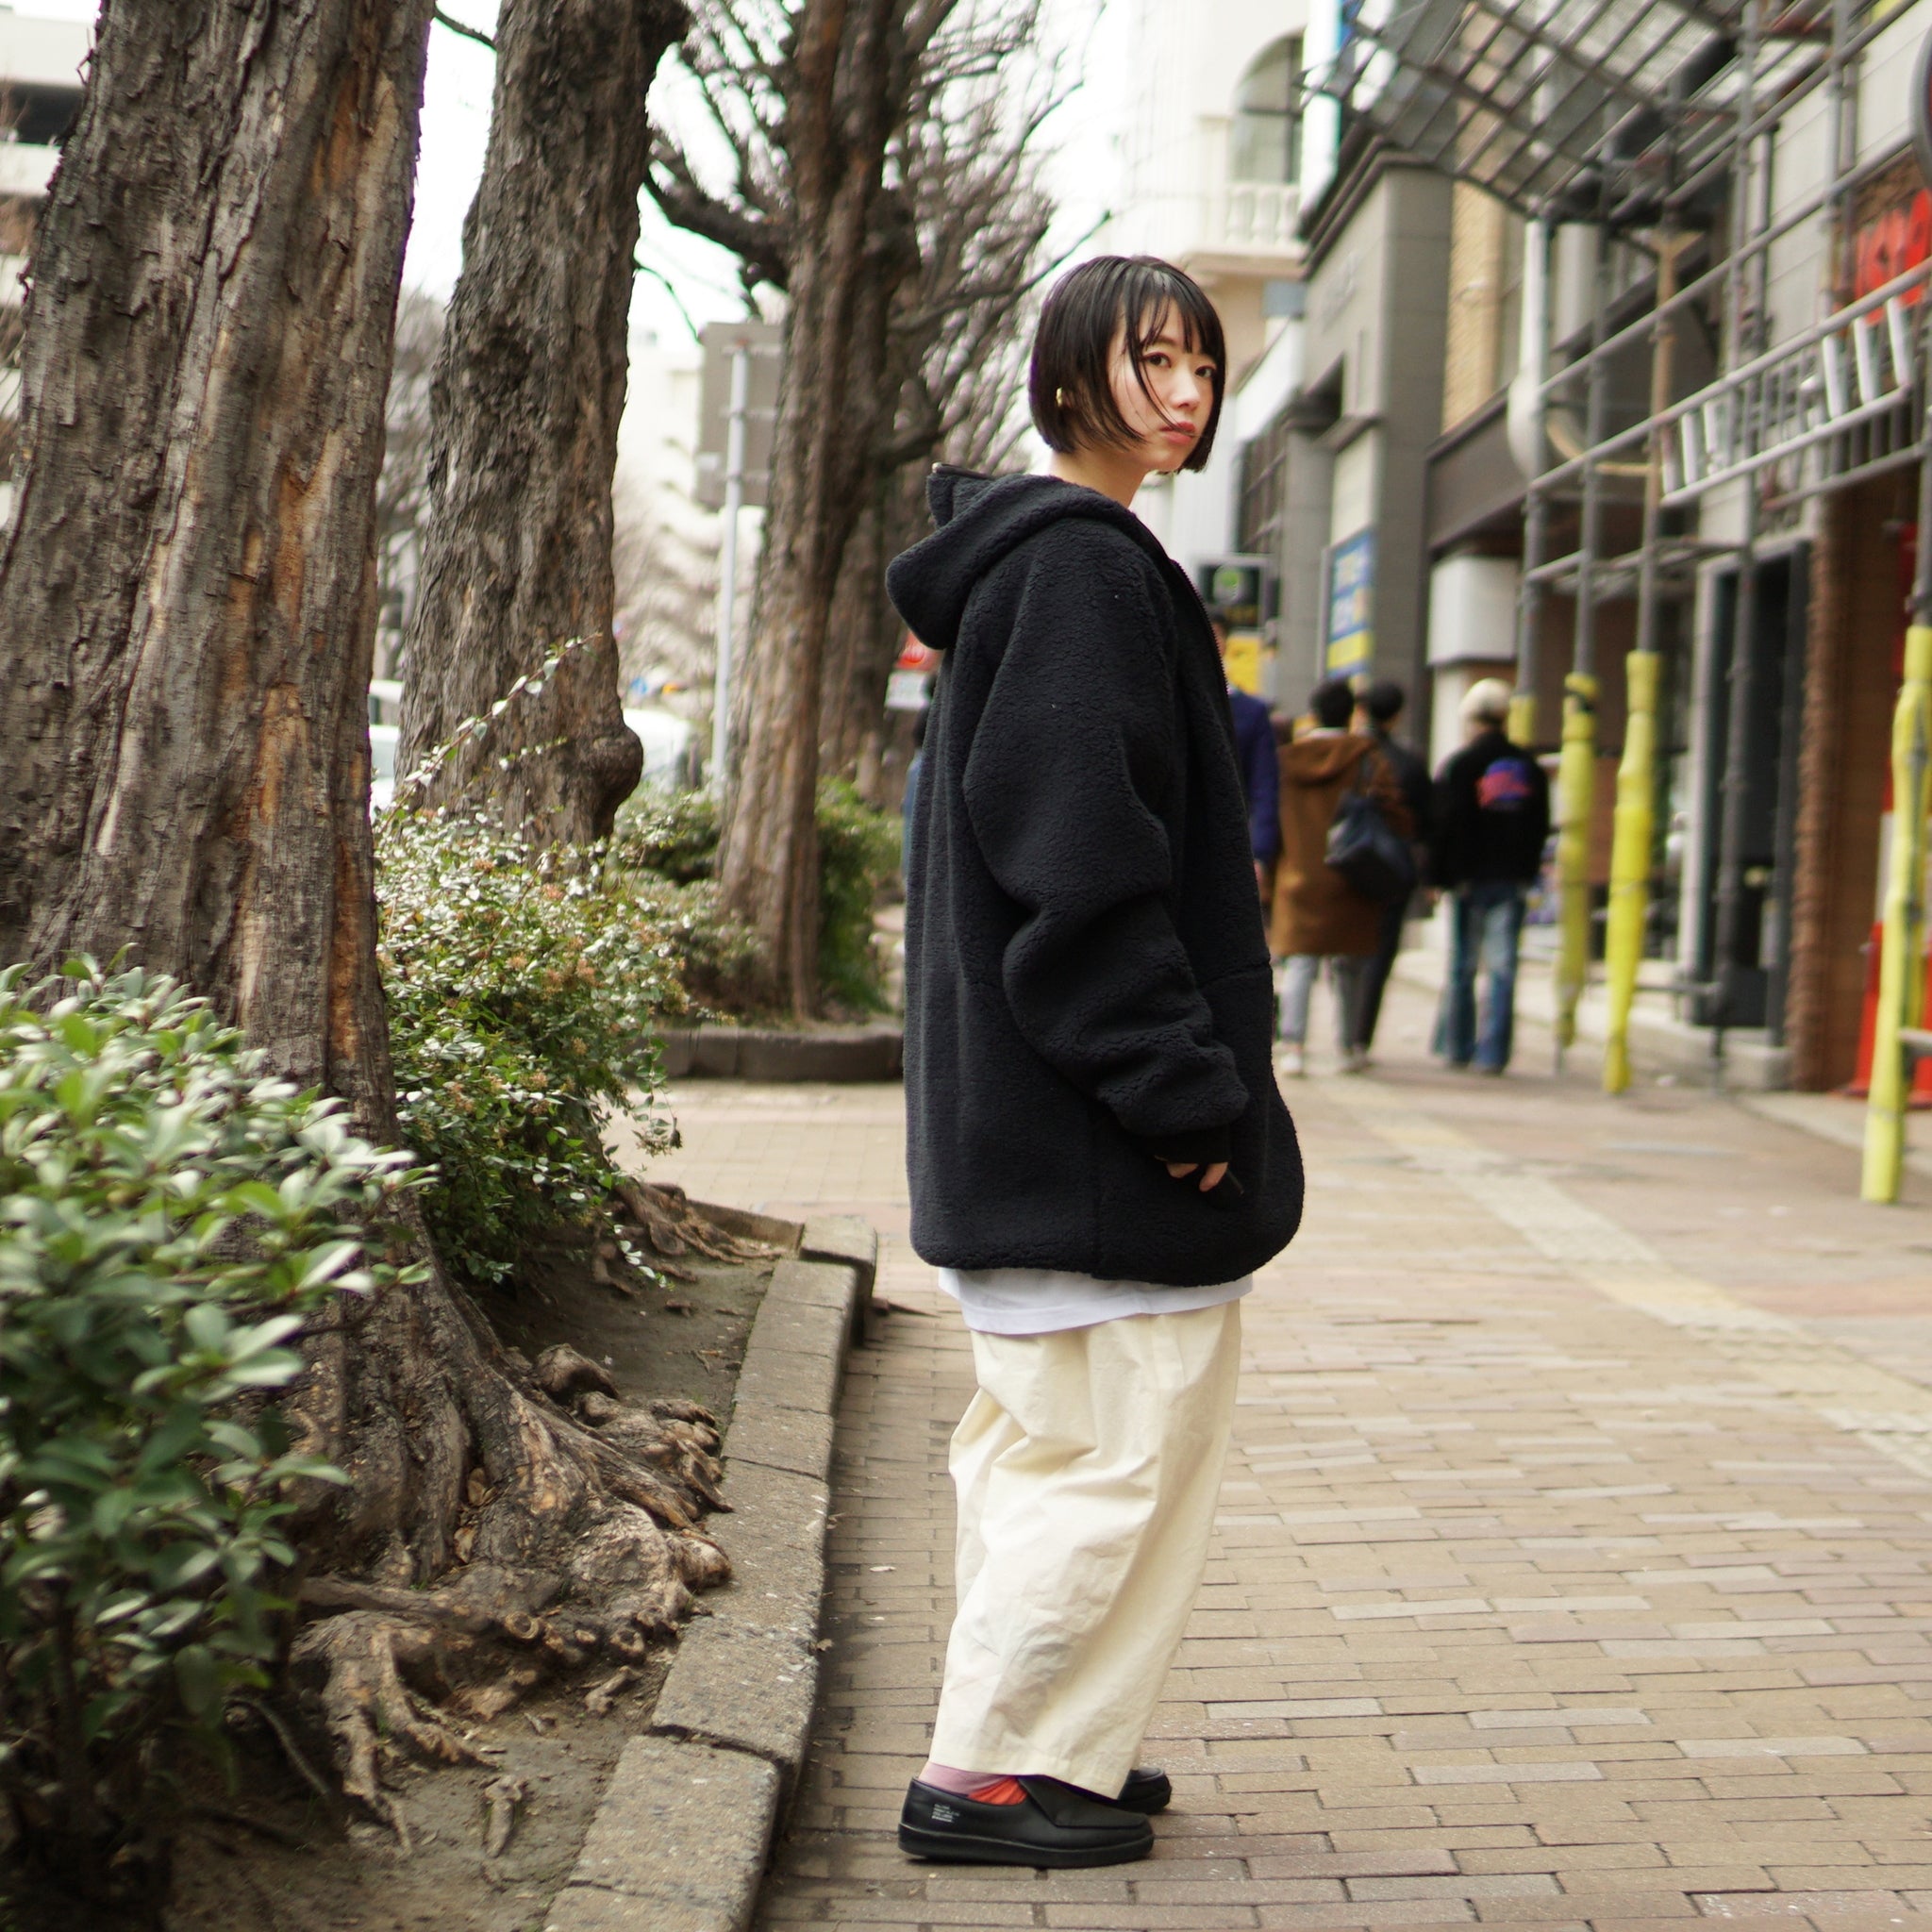 No:JAAG030 | Name:Spectrum Sherpa Hoodie 015 | Color:Black【AGELESS GALAXY_エイジレスギャラクシー】